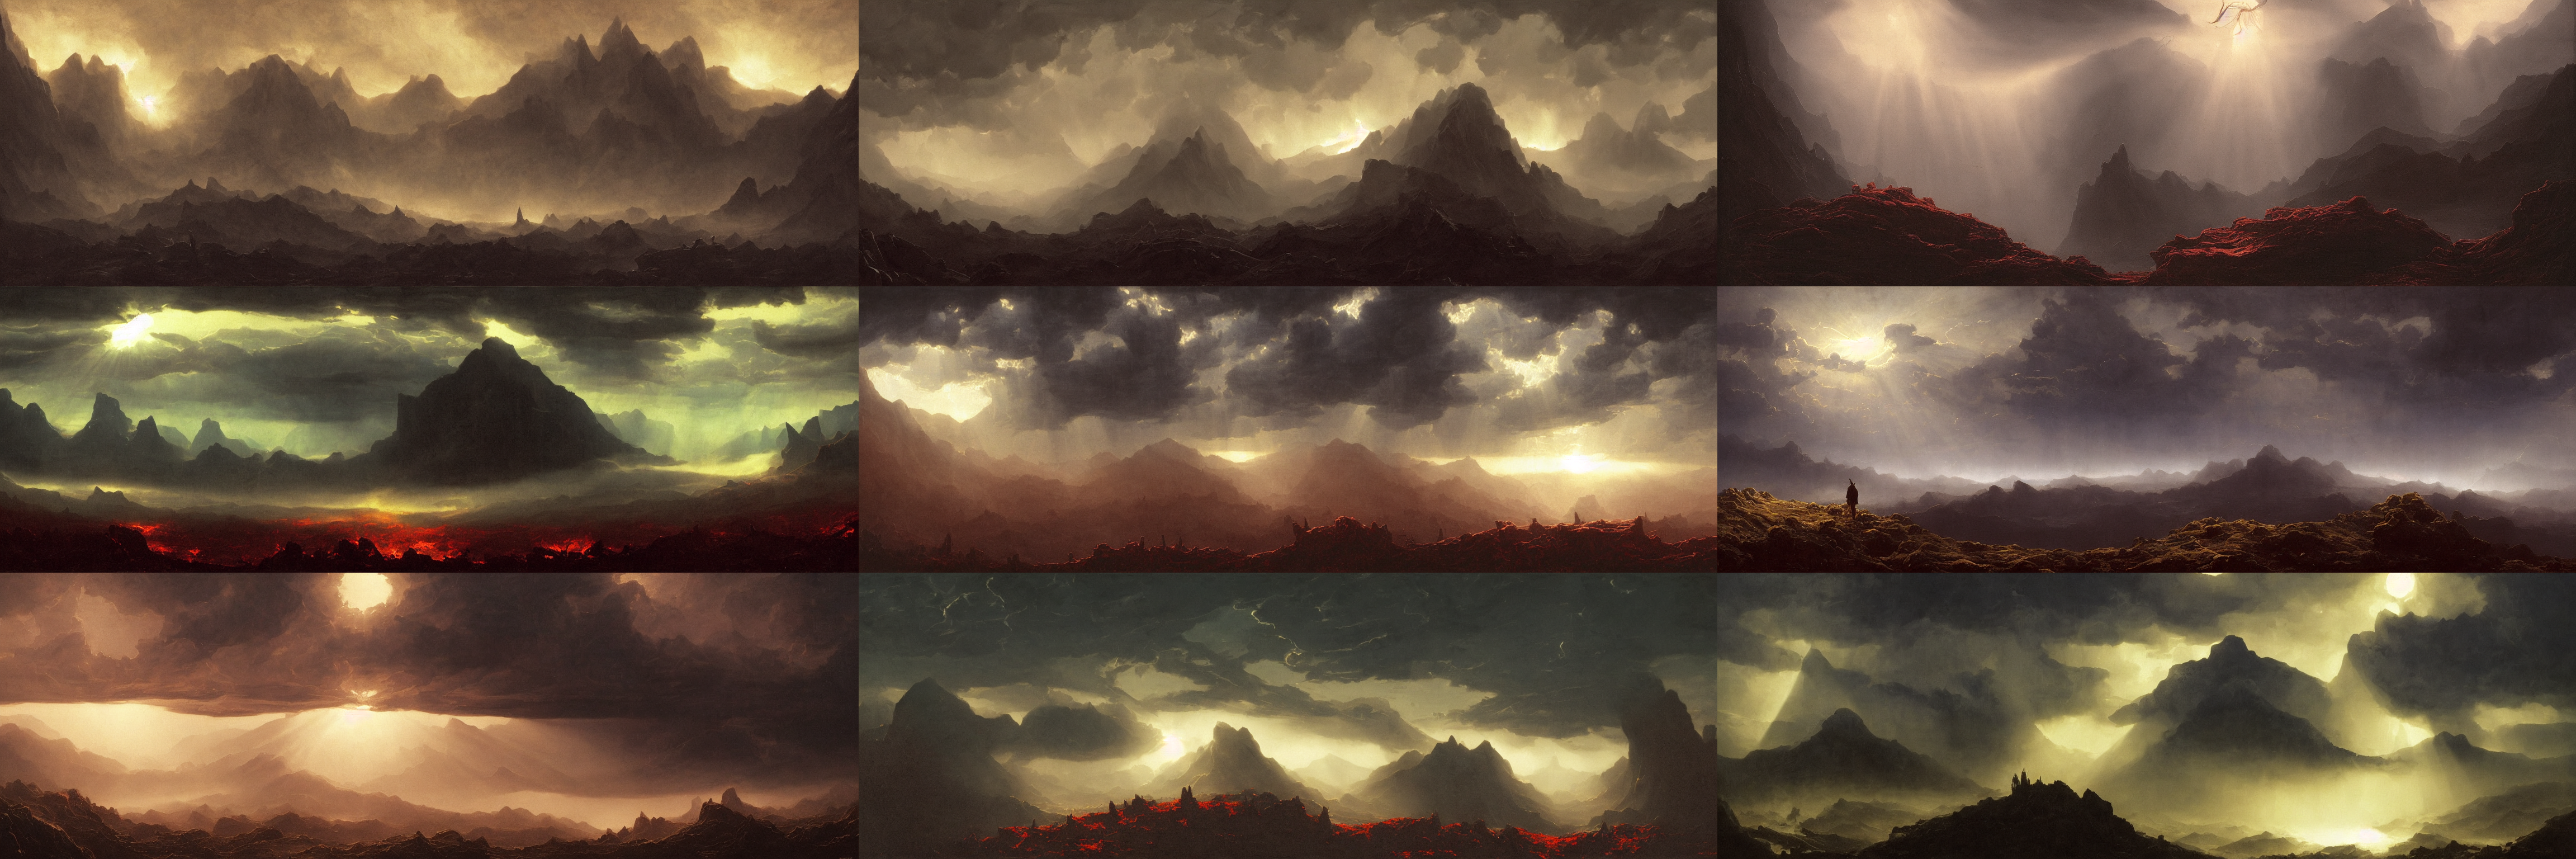 Low ultrawide shot, dark mountains abyss, stylized, detailed gouache paintings, crepuscular rays, dark, murky, foggy atmospheric, nicola samor